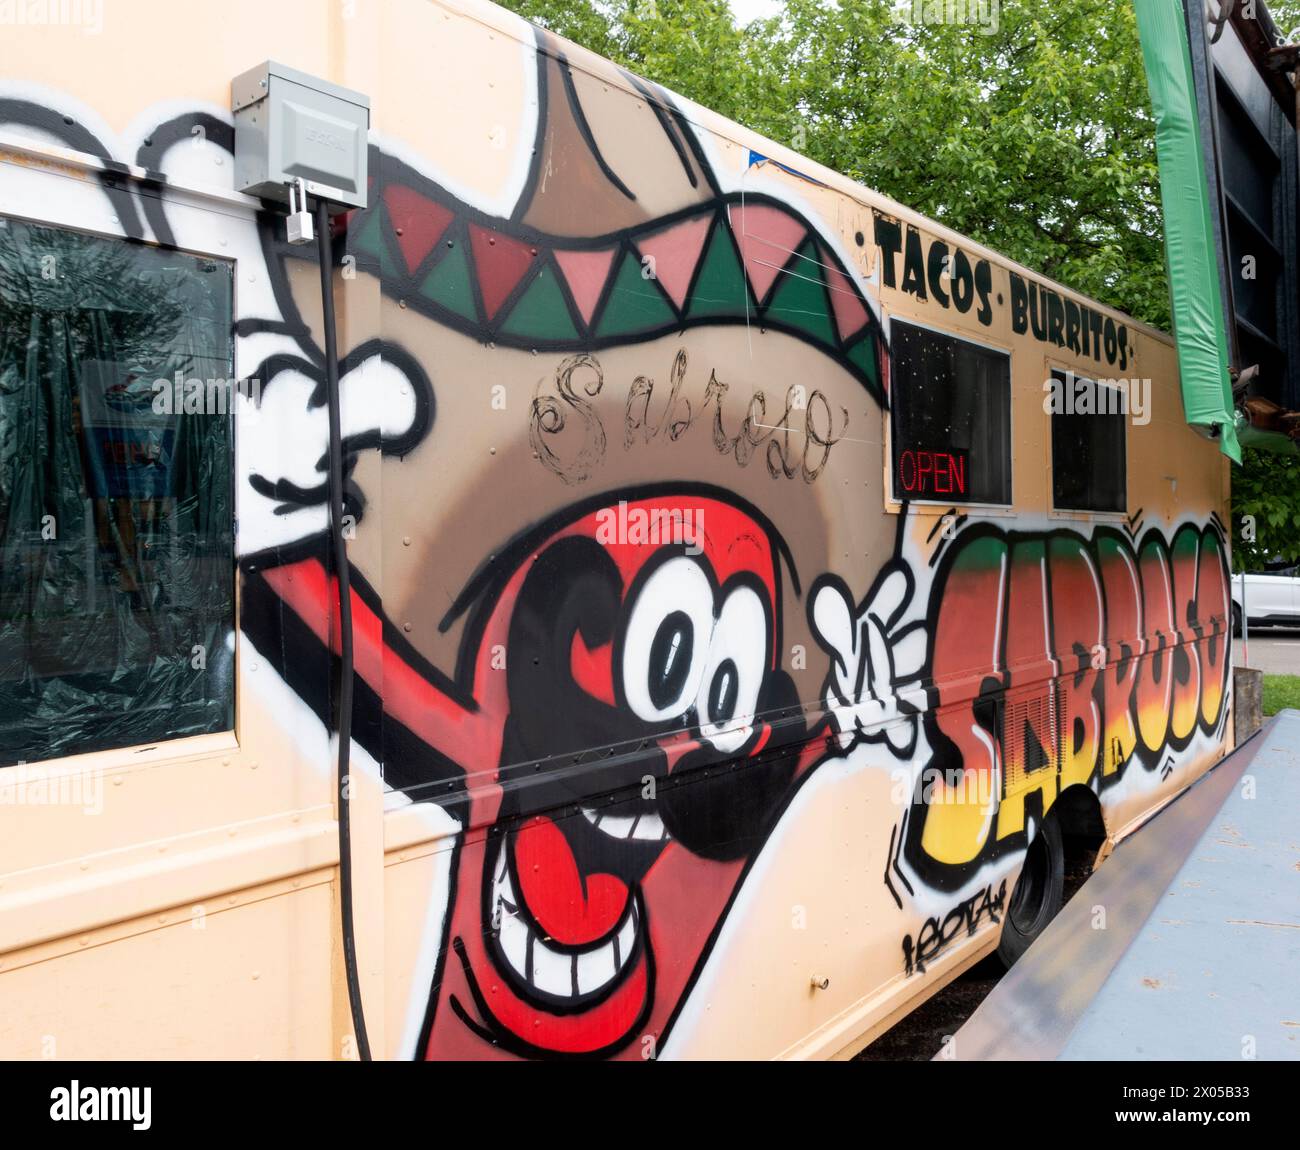 Taco truck to grab a meal with fun caricature painting on the truck. St Paul Minnesota MN USA Stock Photo